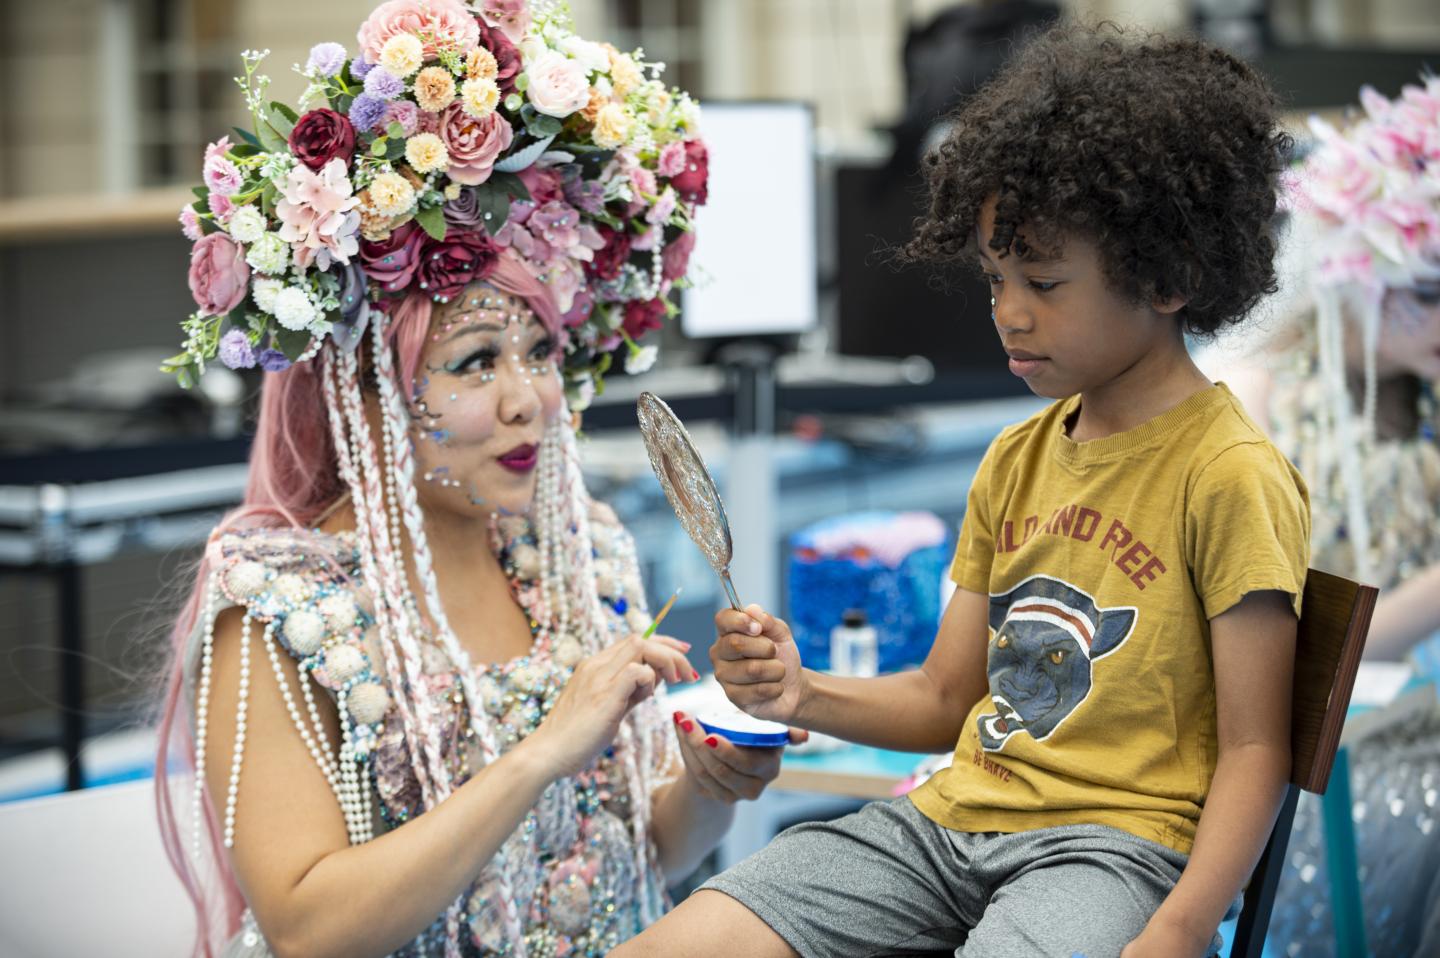 The image shows a child looking in a mirror next to a person dressed as a mermaid who has painted a design on the child's face.